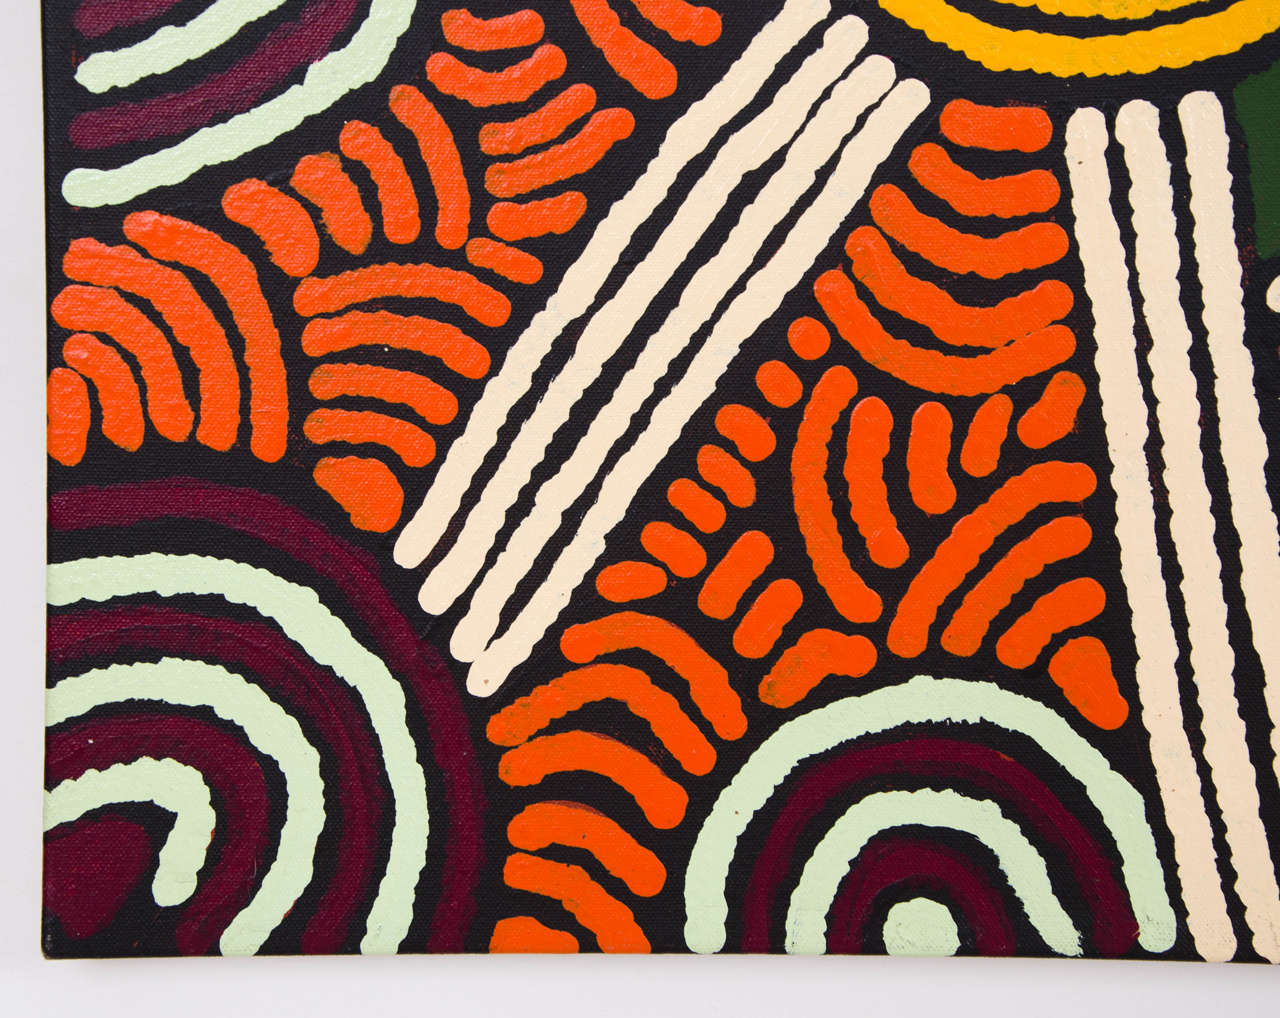 Hand-Painted Large Colourful Aboriginal Australian Acrylic Painting For Sale